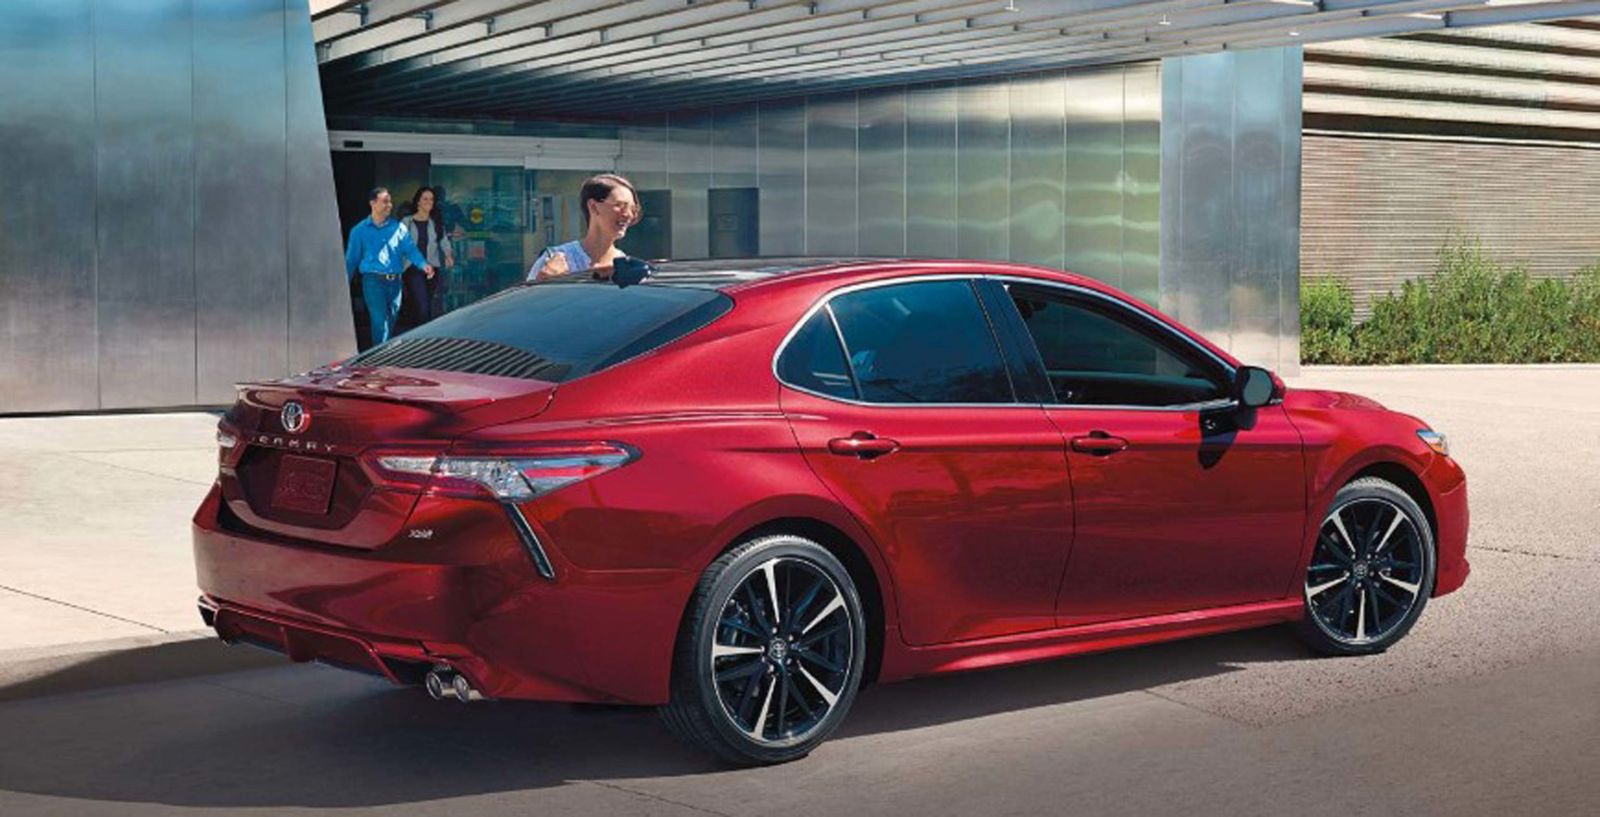 Illustration for article titled Rental Car Review: 2019 Toyota Camry